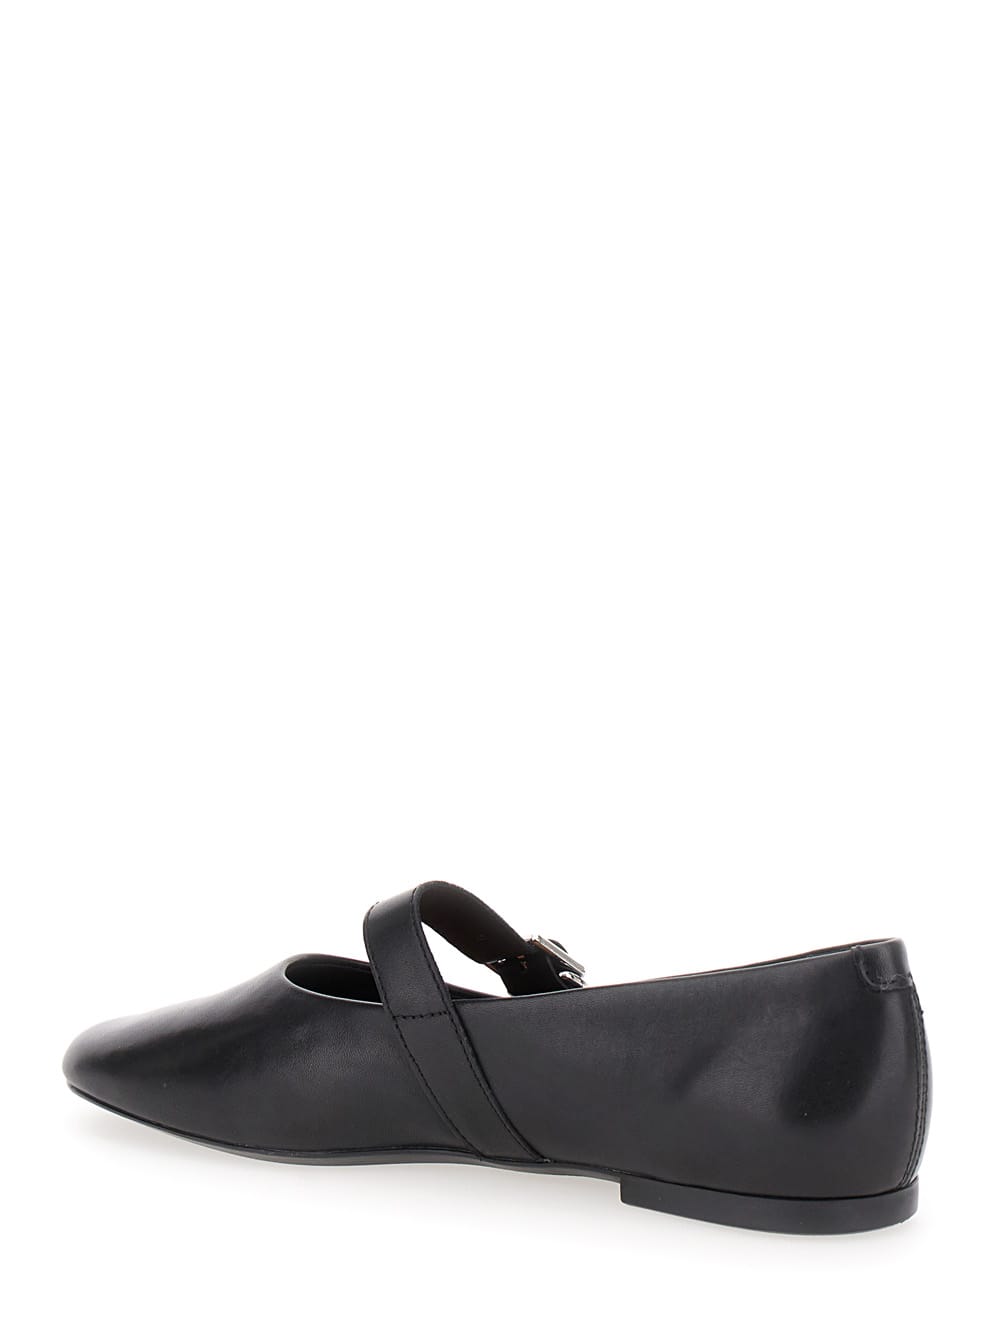 Shop Vagabond Jolin Black Ballet Flats With Strap In Smooth Leather Woman